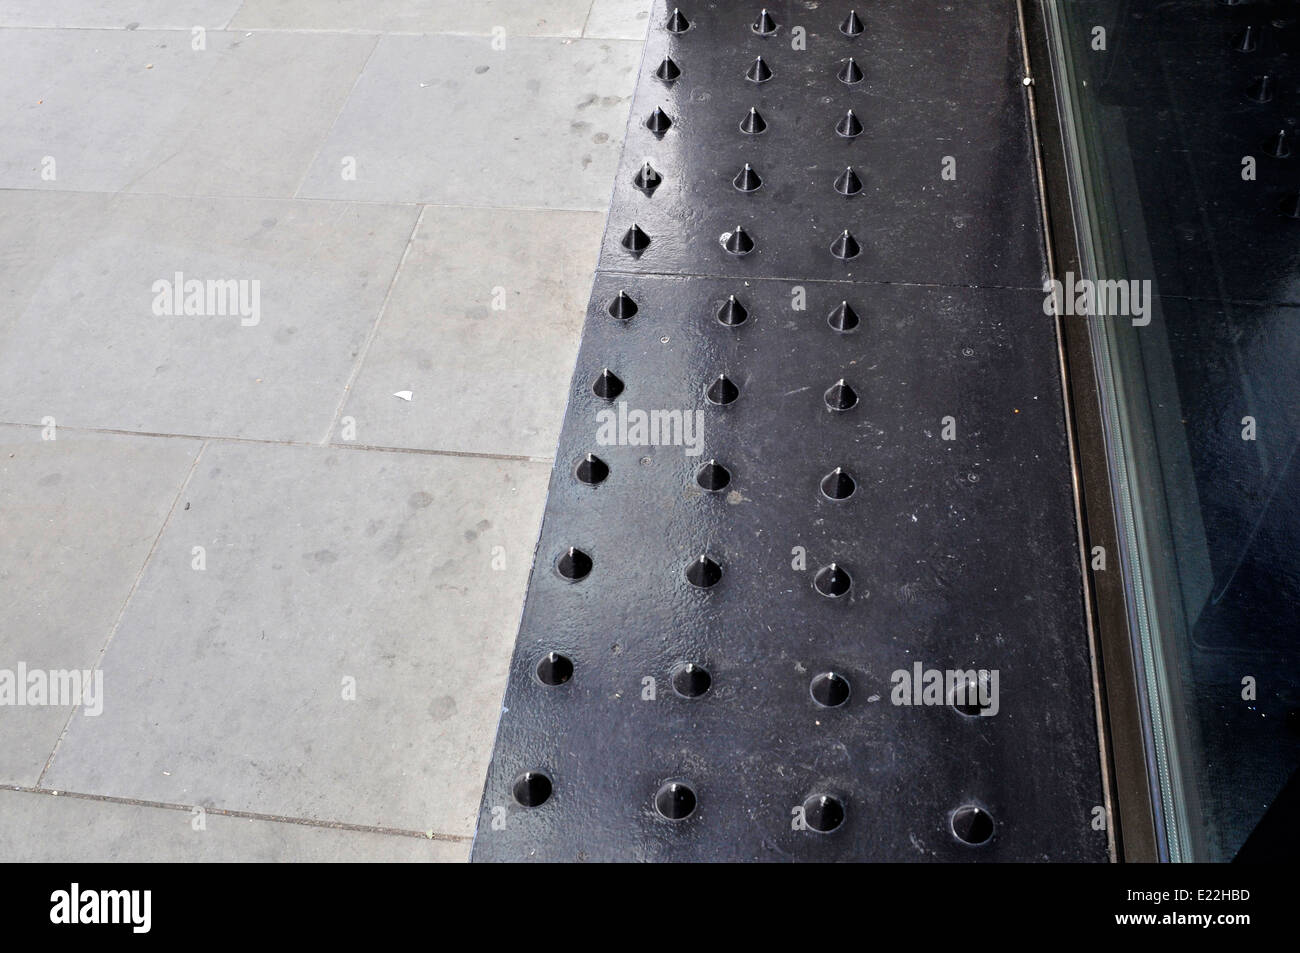 Spikes outside Tesco supermarket in central London Stock Photo